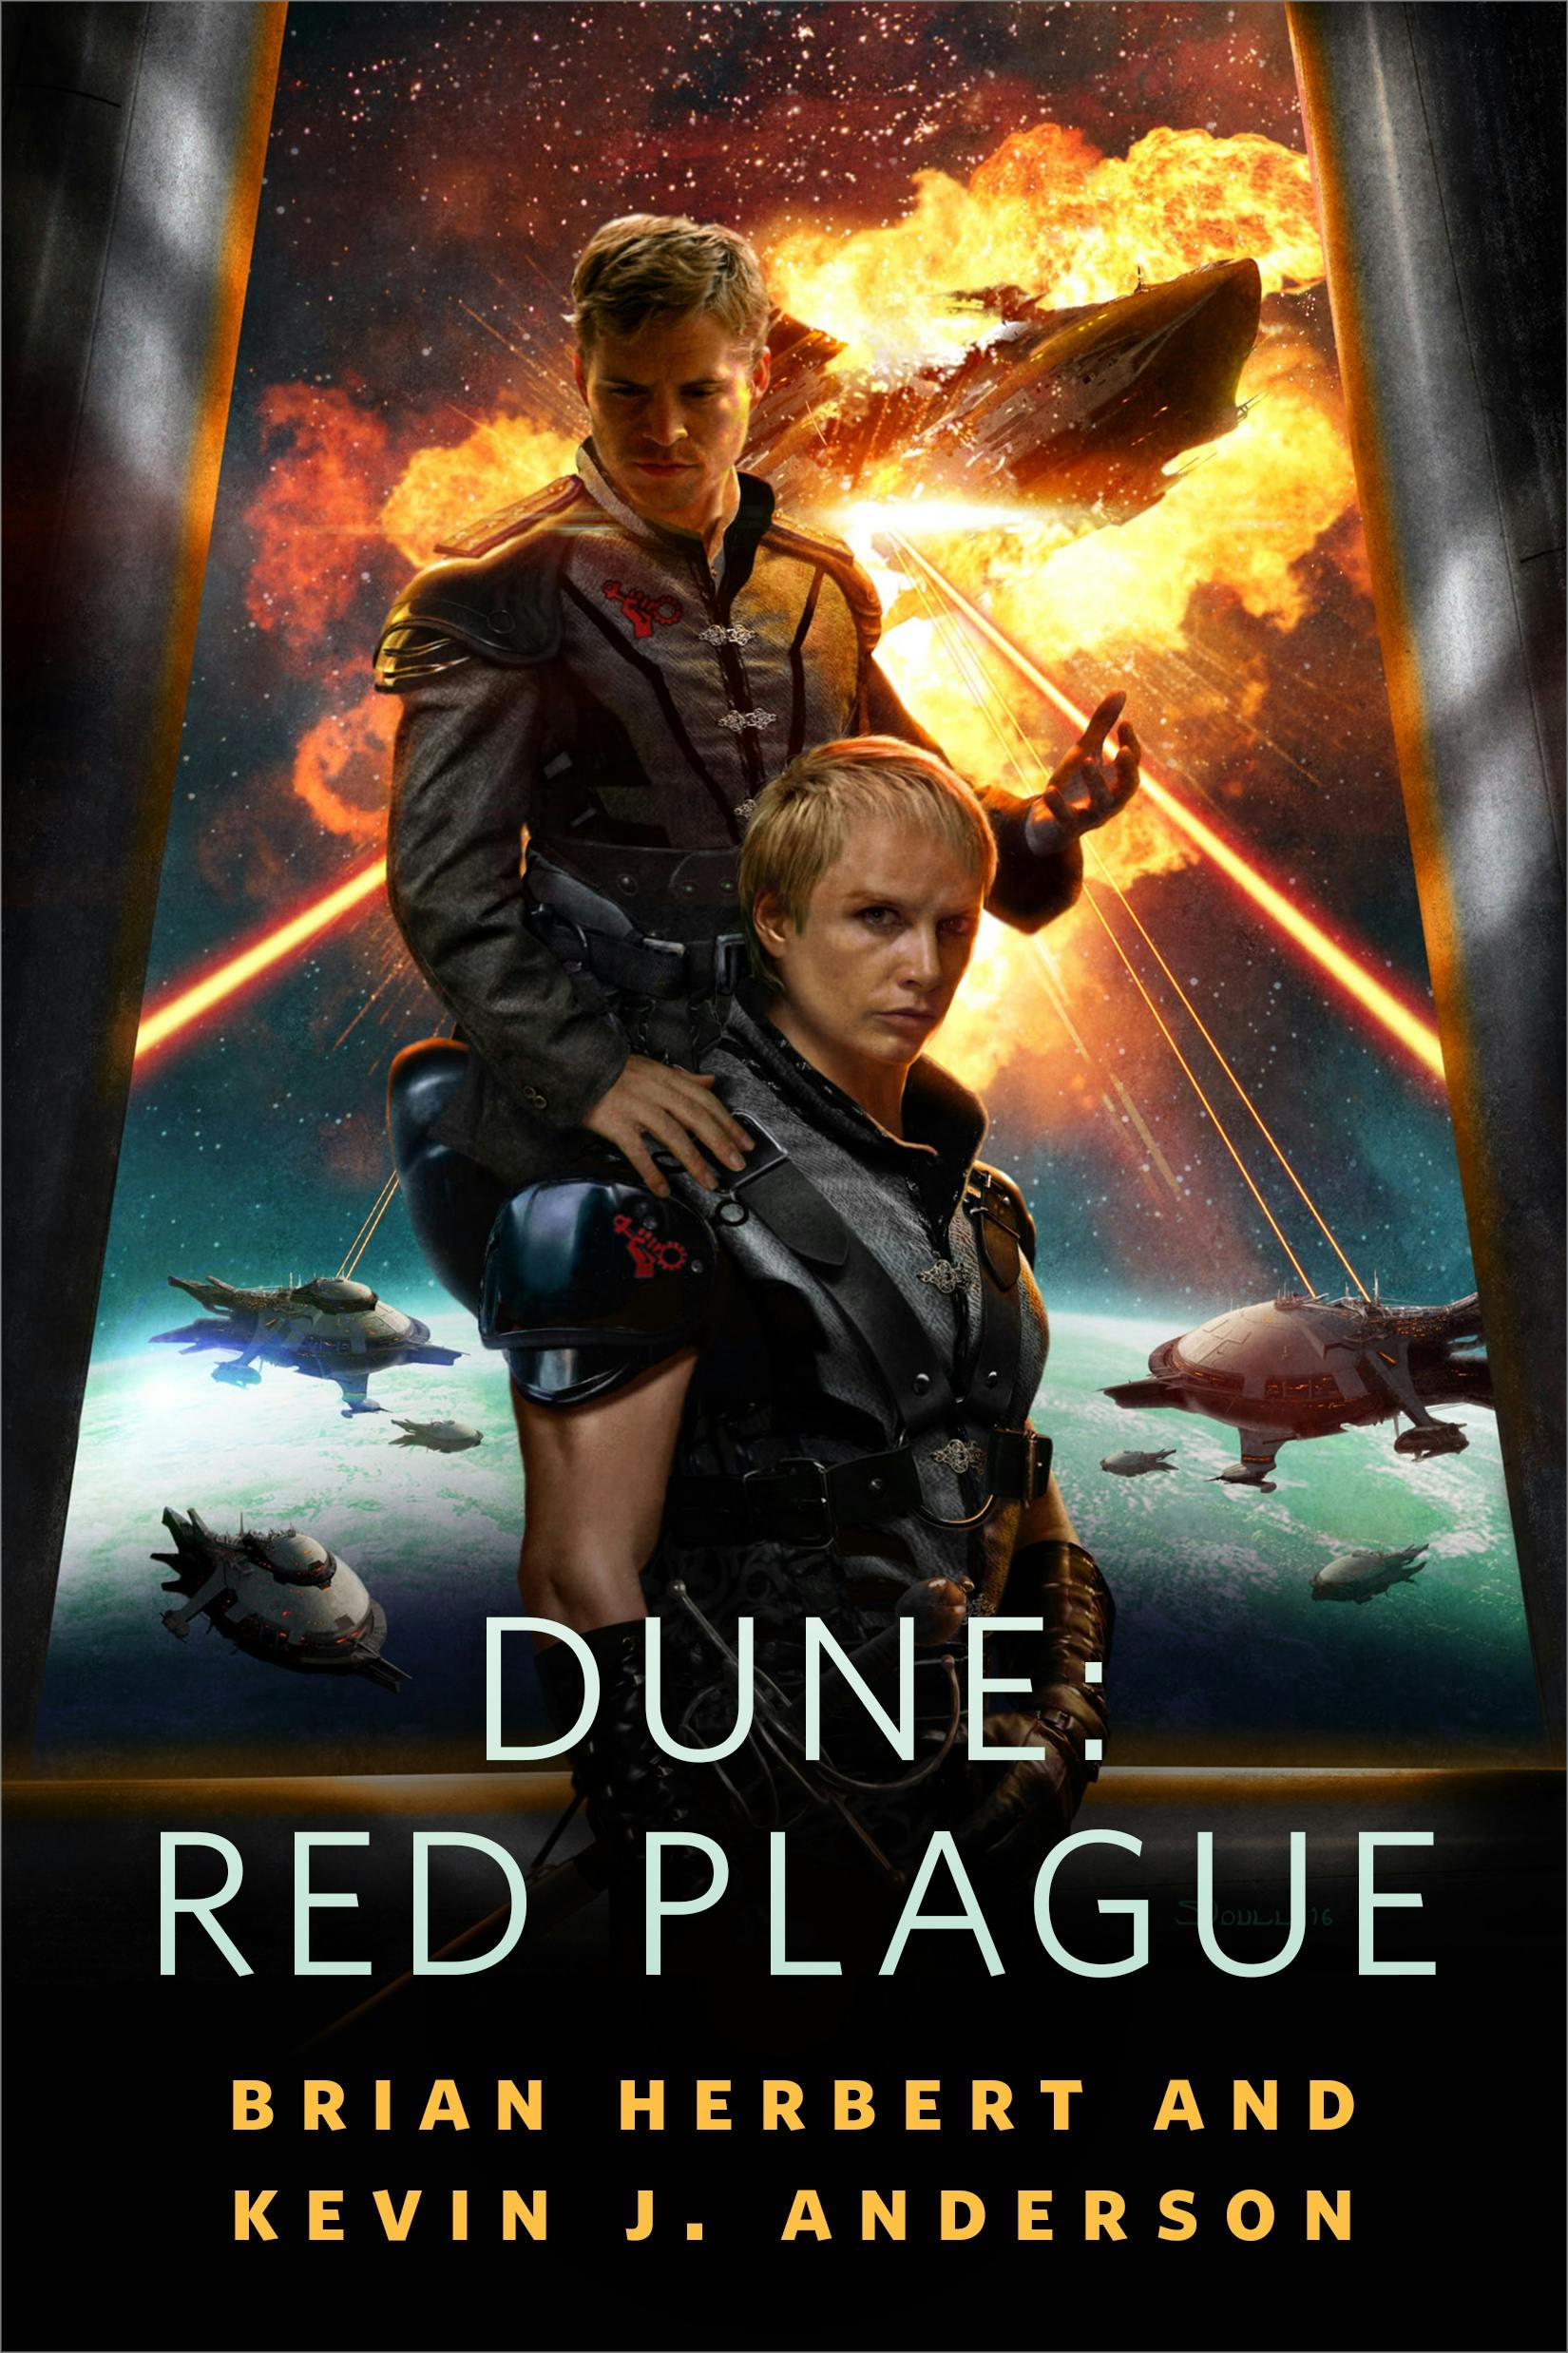 Cover for the book titled as: Dune: Red Plague